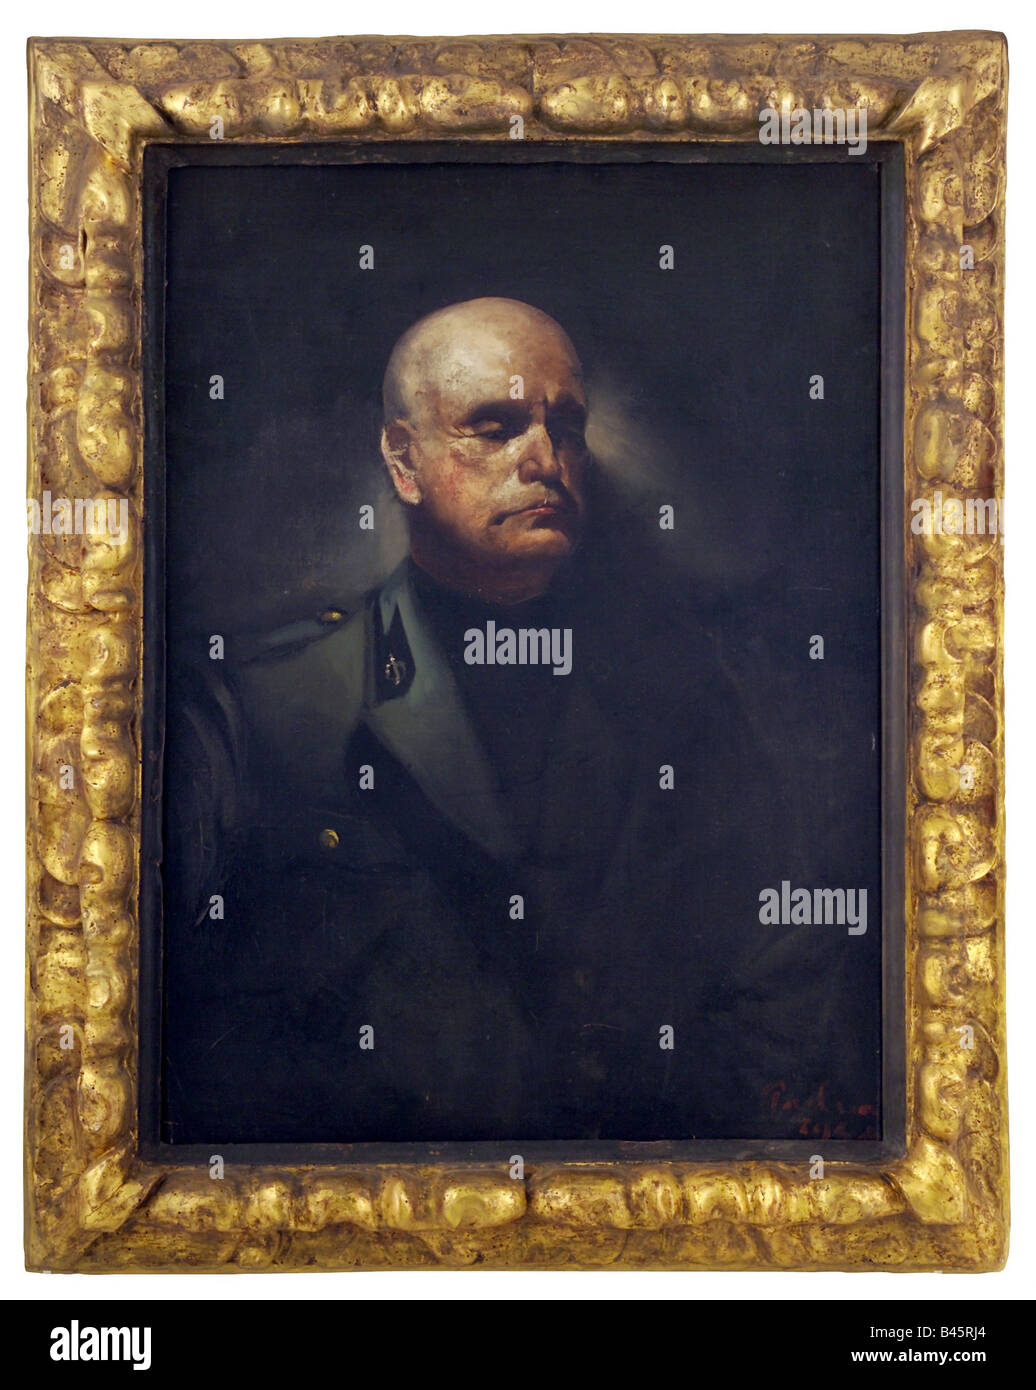 Mussolini, Benito, 29.7.1883 - 28.4.1945, Italien politician (PNF), Prime Minister 30.10.1922 - 25.7.1943, portrait, painting by Paul Mathias Padua (1903 - 1981), Germany 1941, Stock Photo